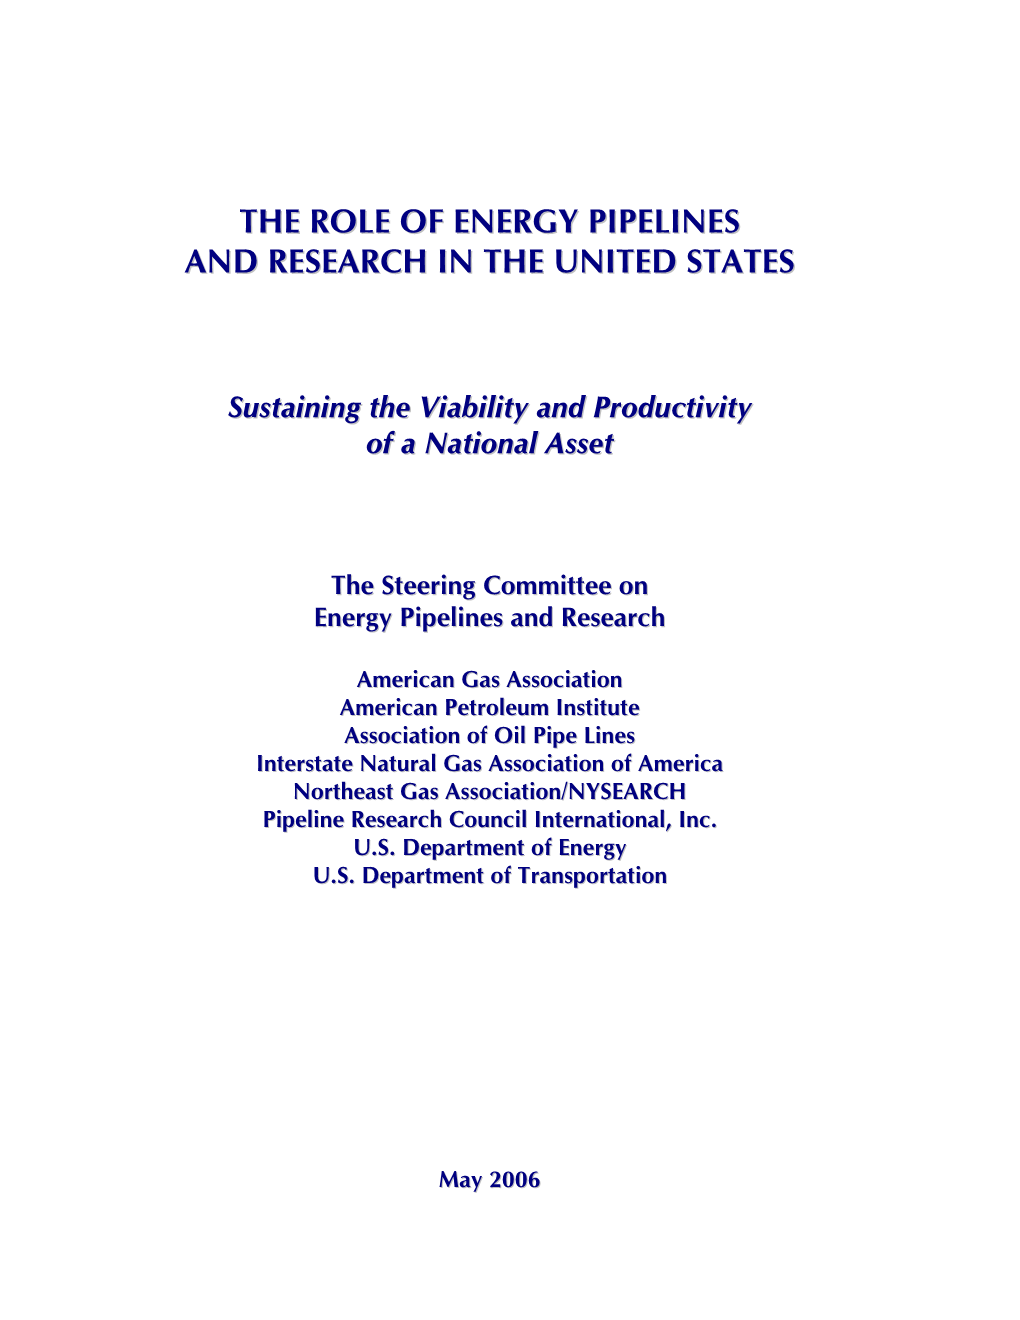 The Role of Energy Pipelines and Research in the United States